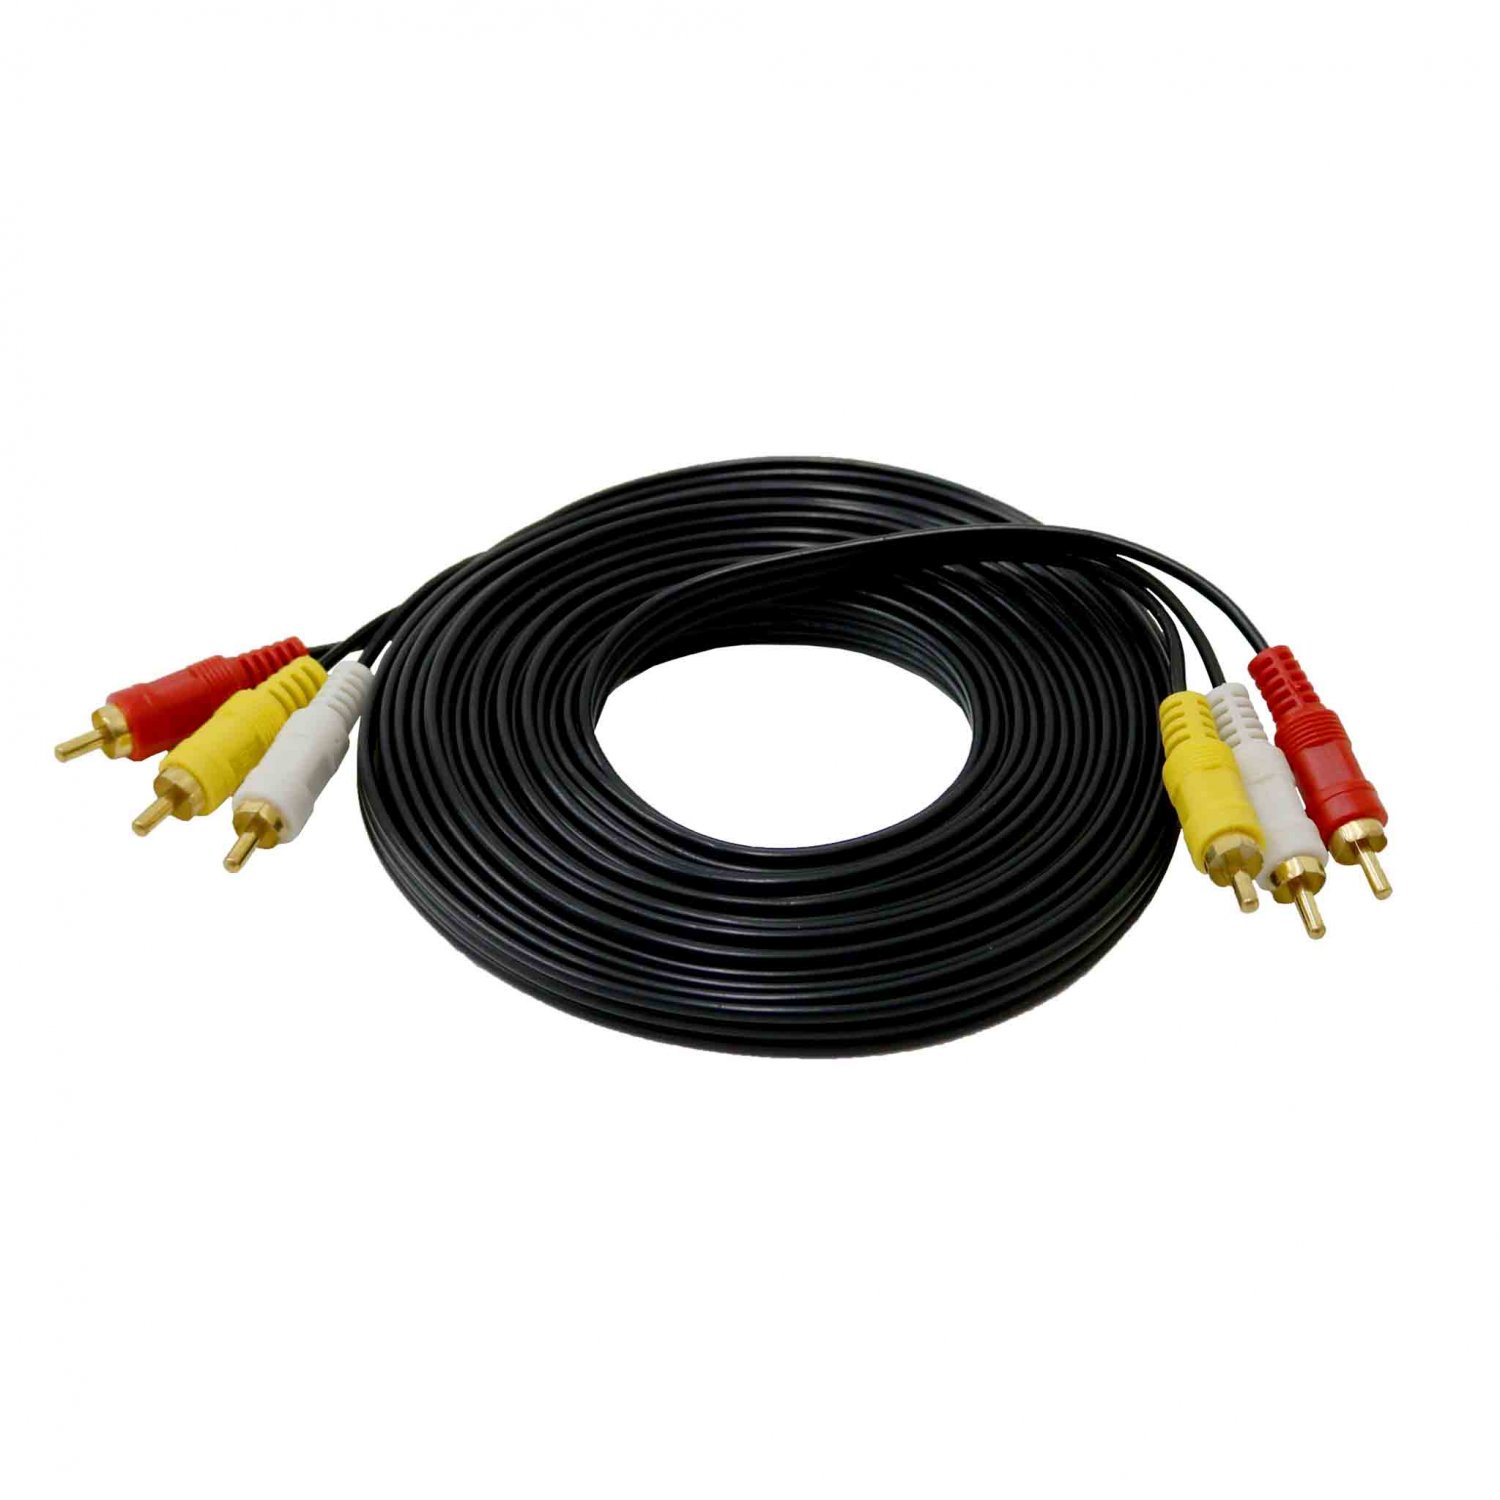 5m Triple 3 Phono 3RCA to 3RCA AV Audio Video Gold Cable Lead